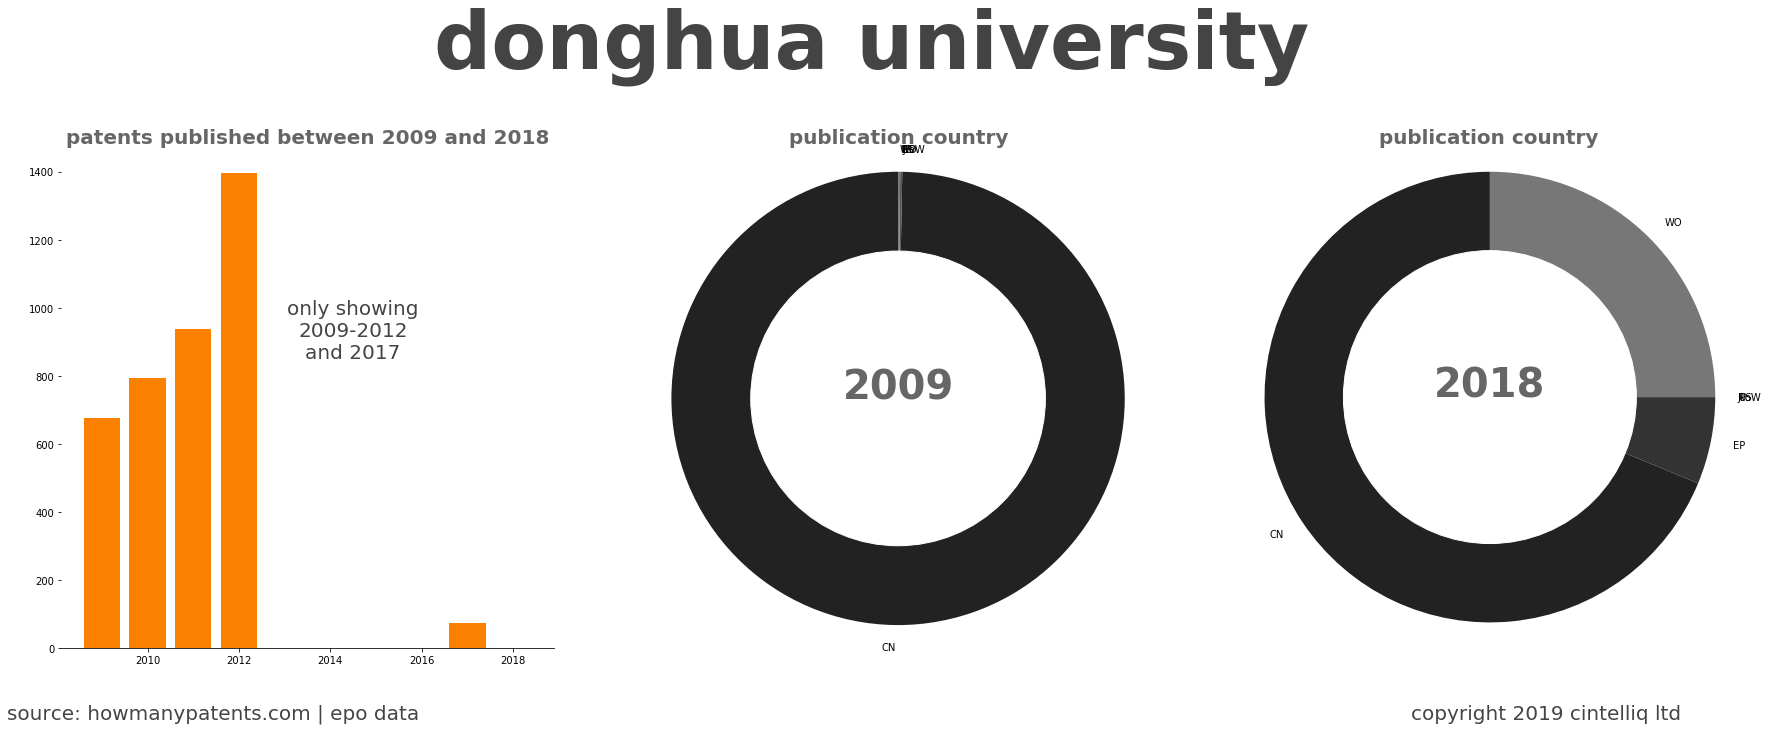 summary of patents for Donghua University